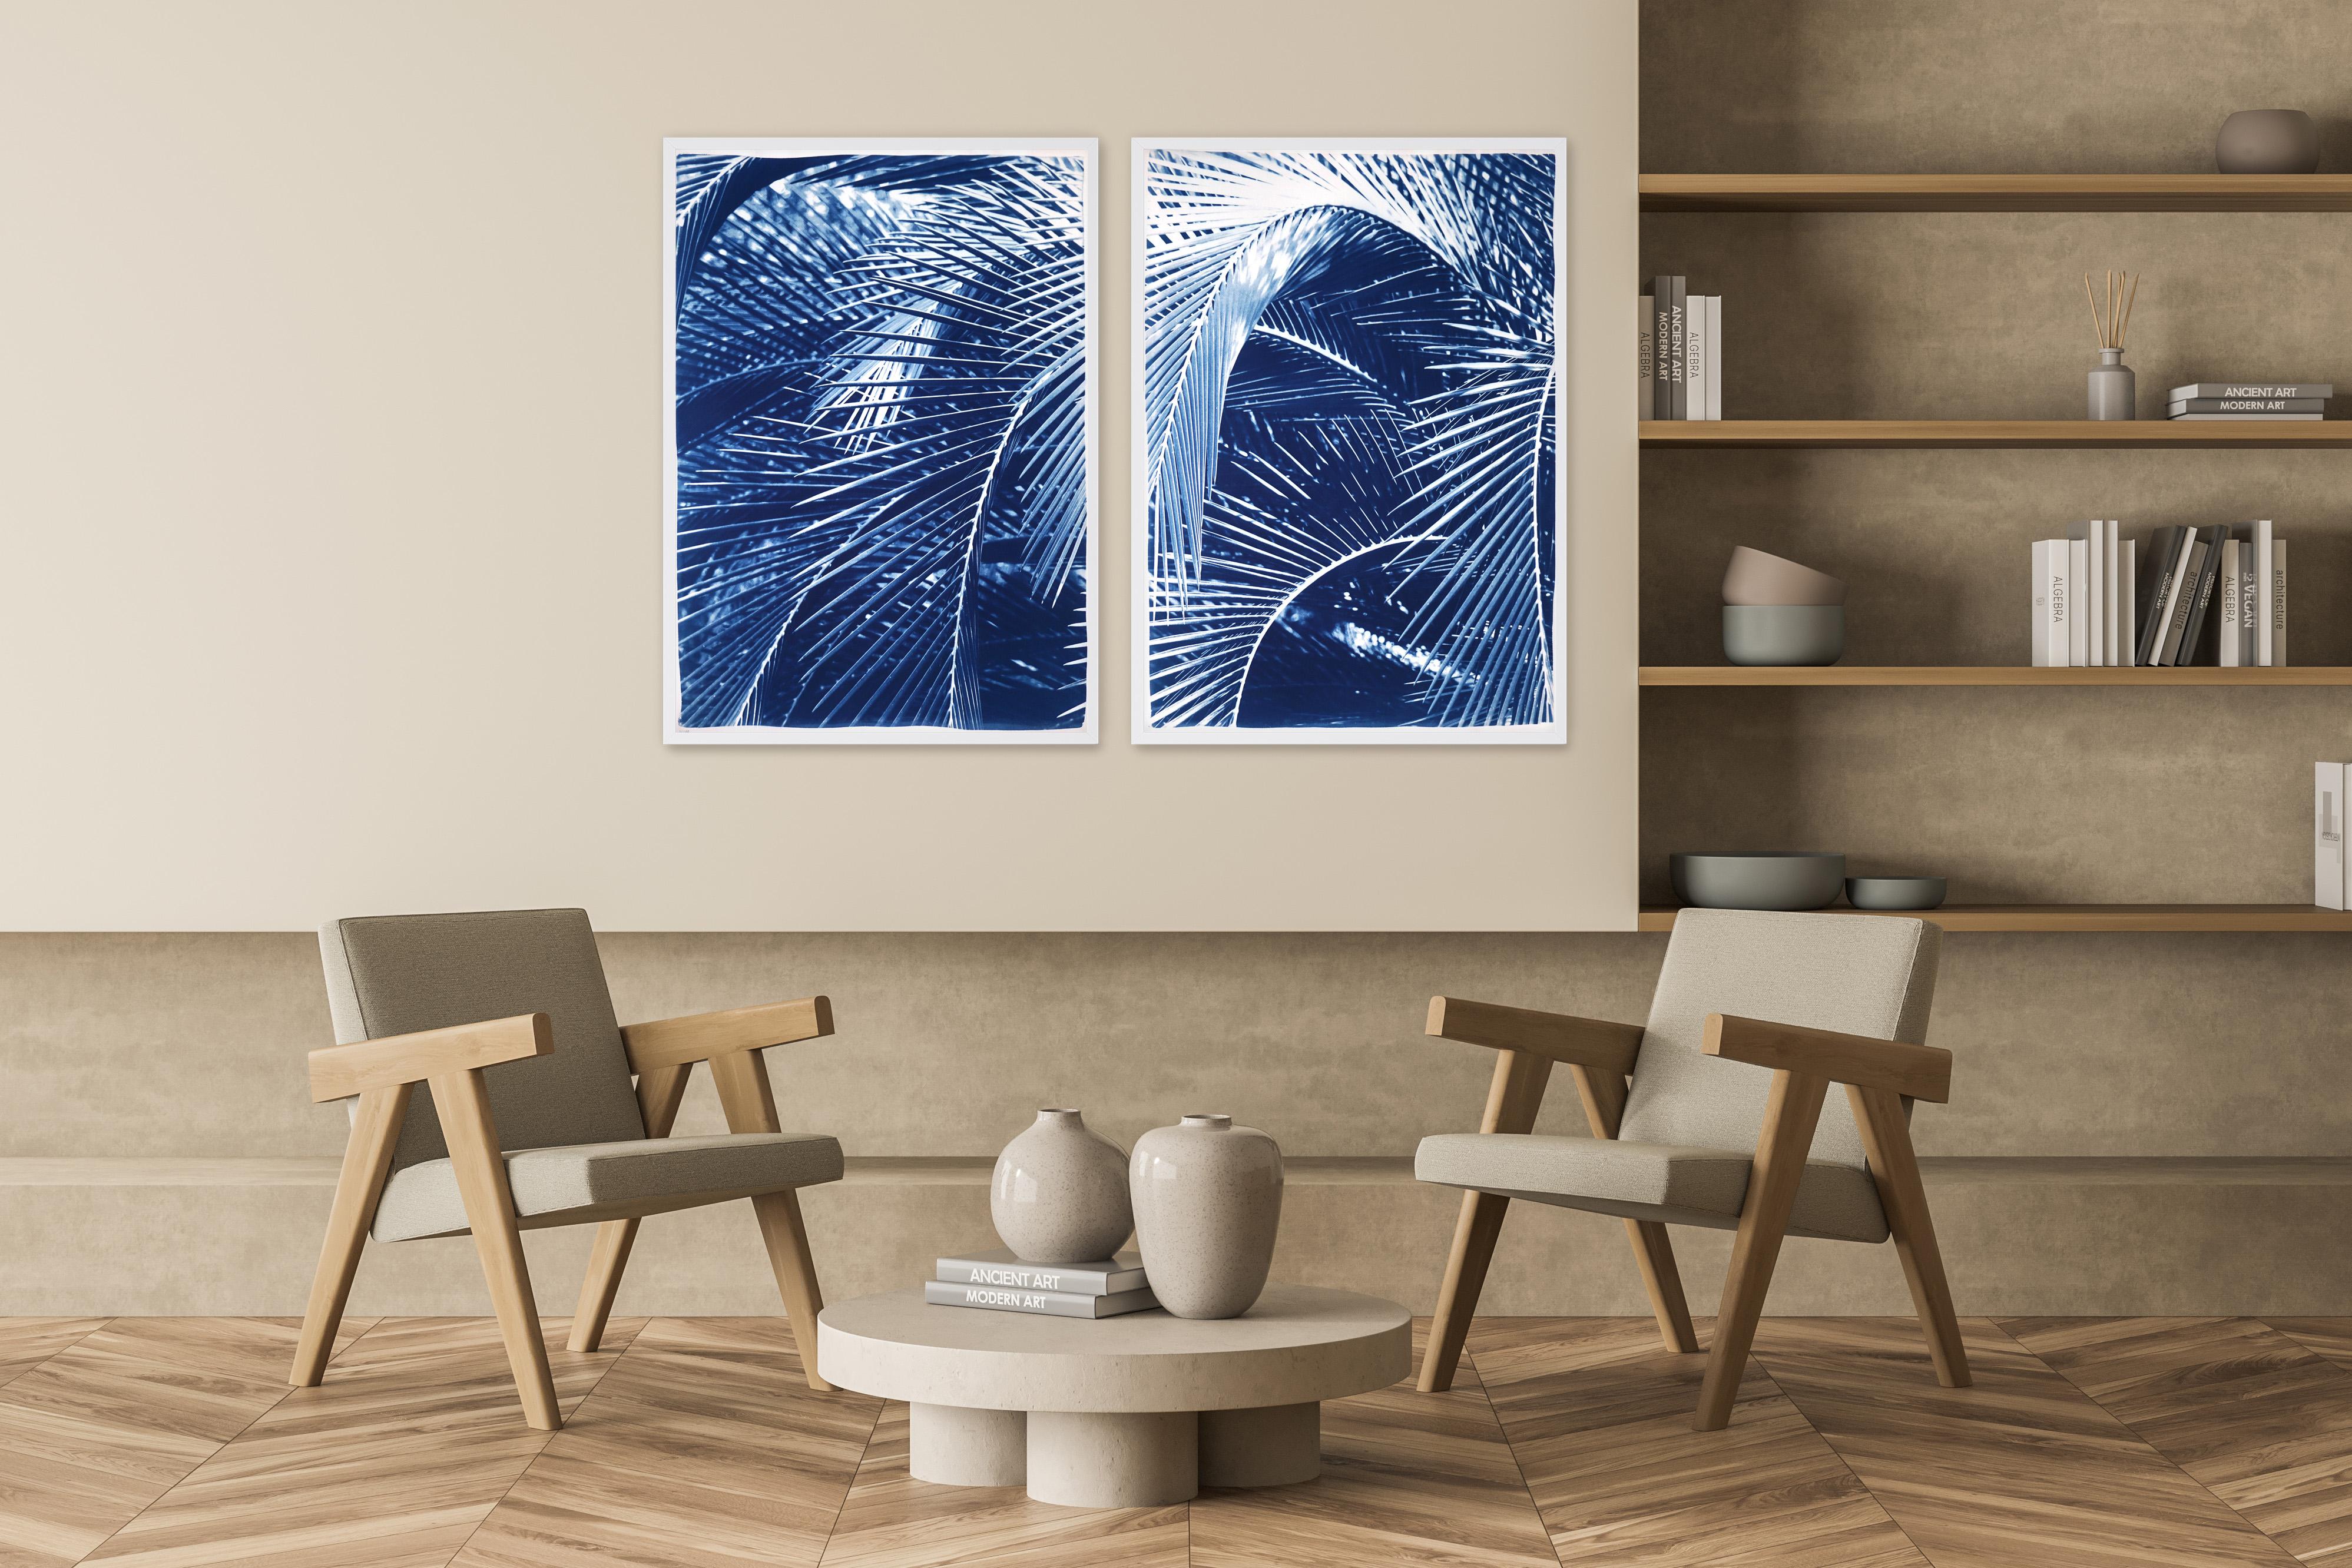 Lush Palm Bushes, Botanical Diptych, Still Life in Blue Tones, Tropical Style 2